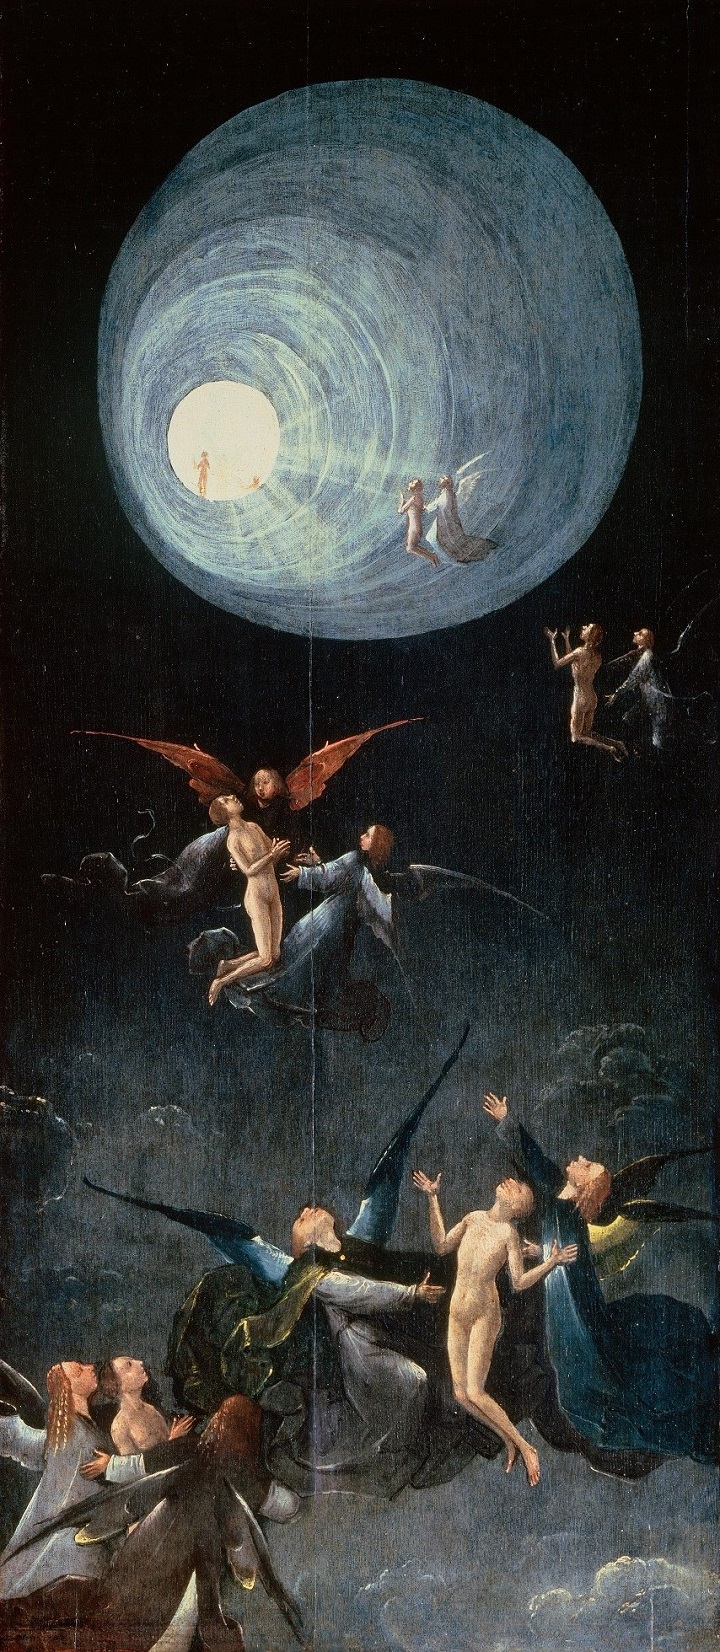 The dead going to Heaven per Hieronymus Bosch